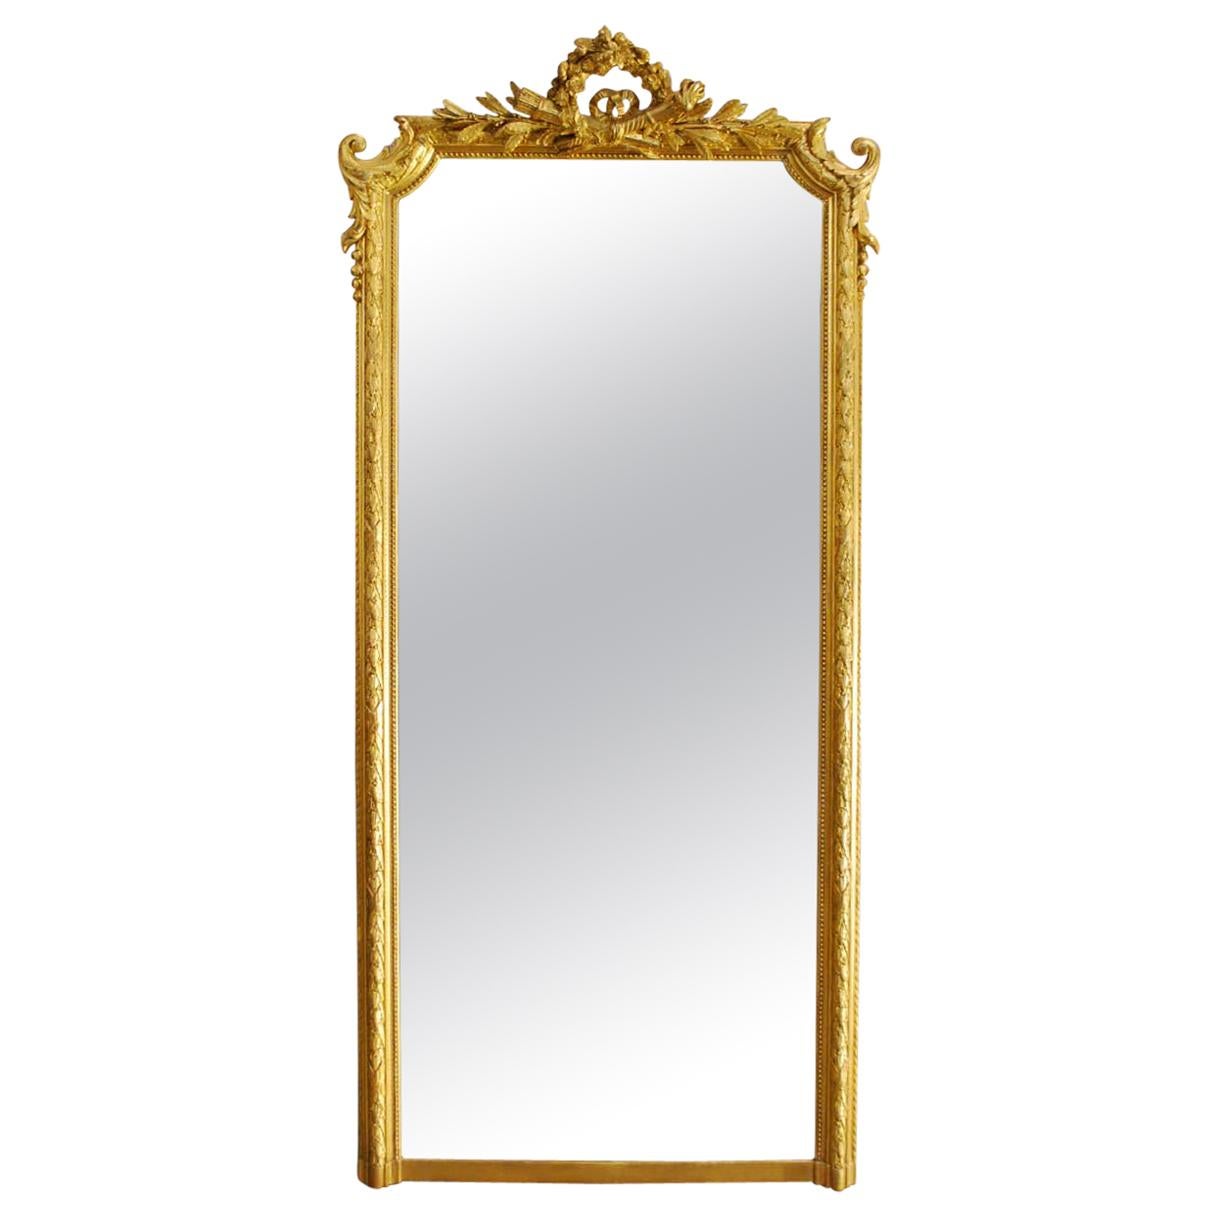 Antique 19th Century French Louis Seize Gold Gilt Mirror with Crest